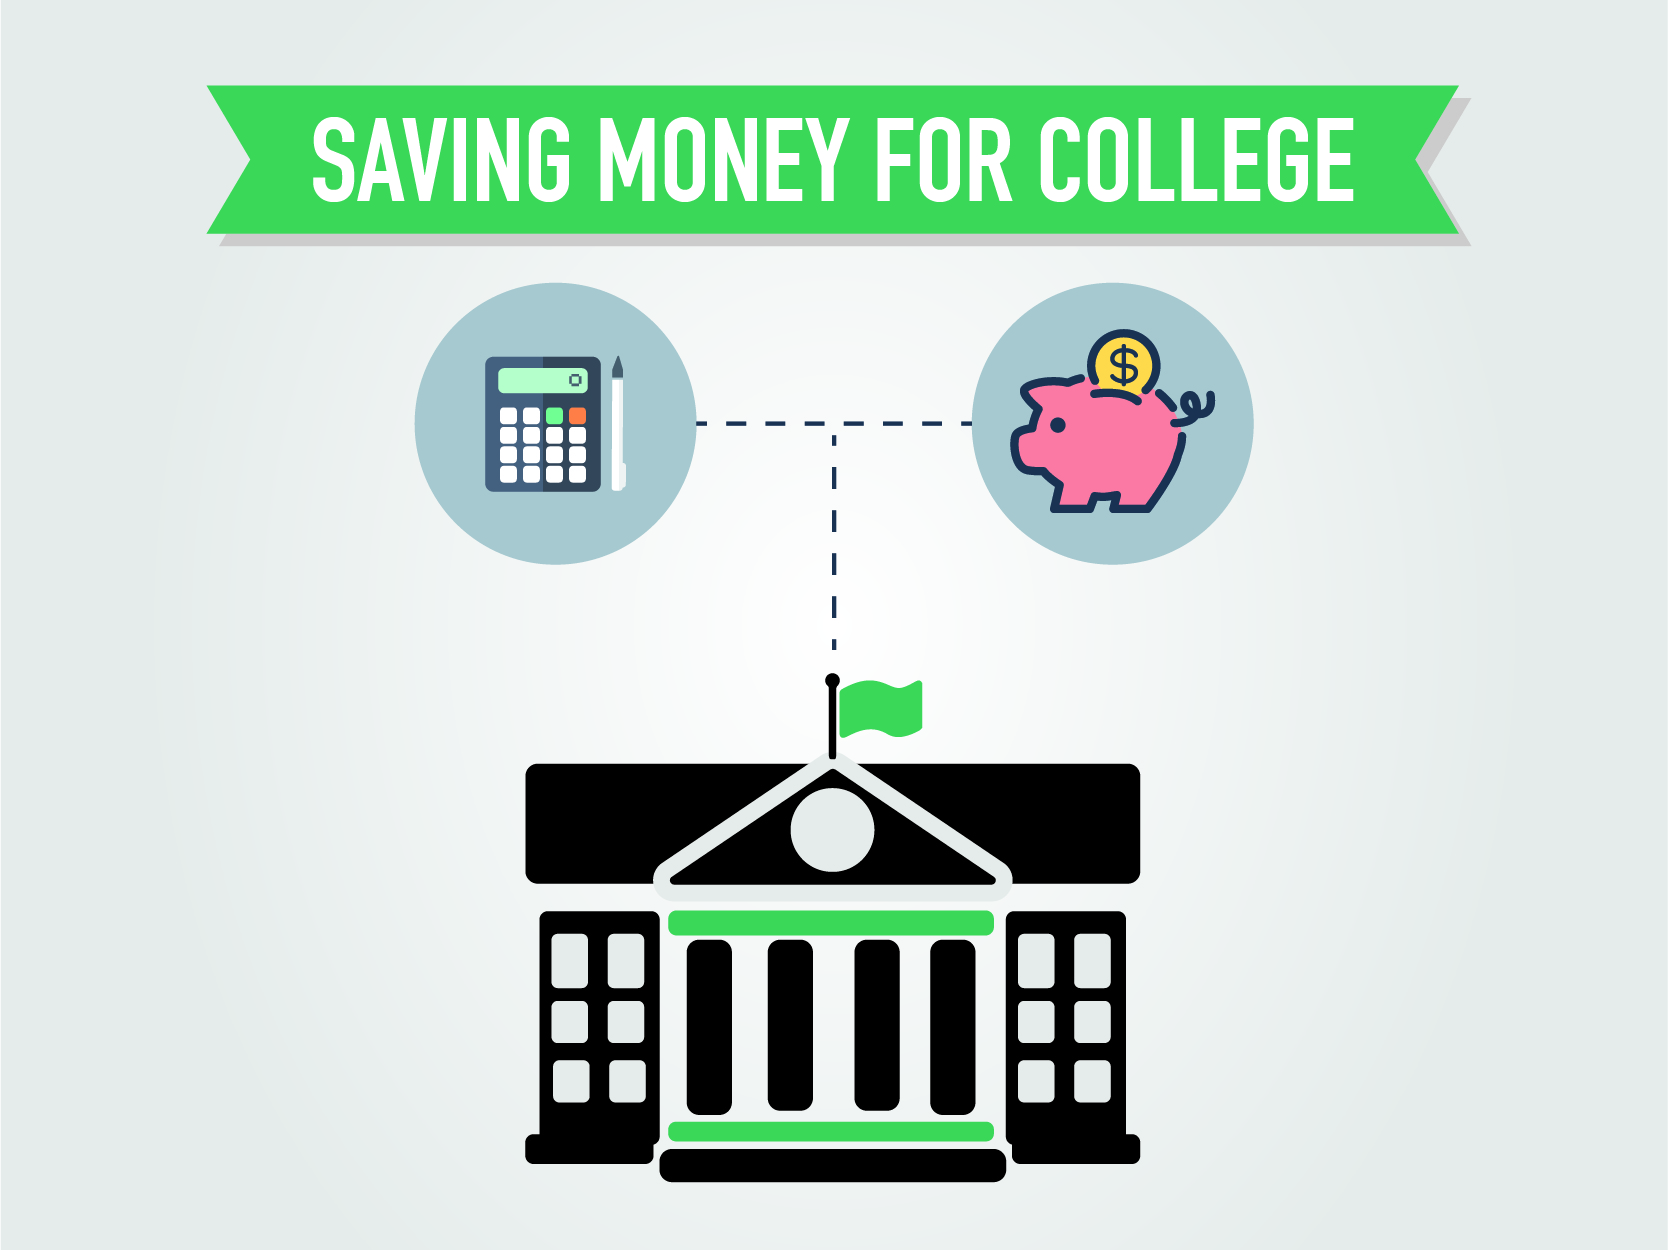 Saving Money for College: Tax Benefits and College Saving Plans